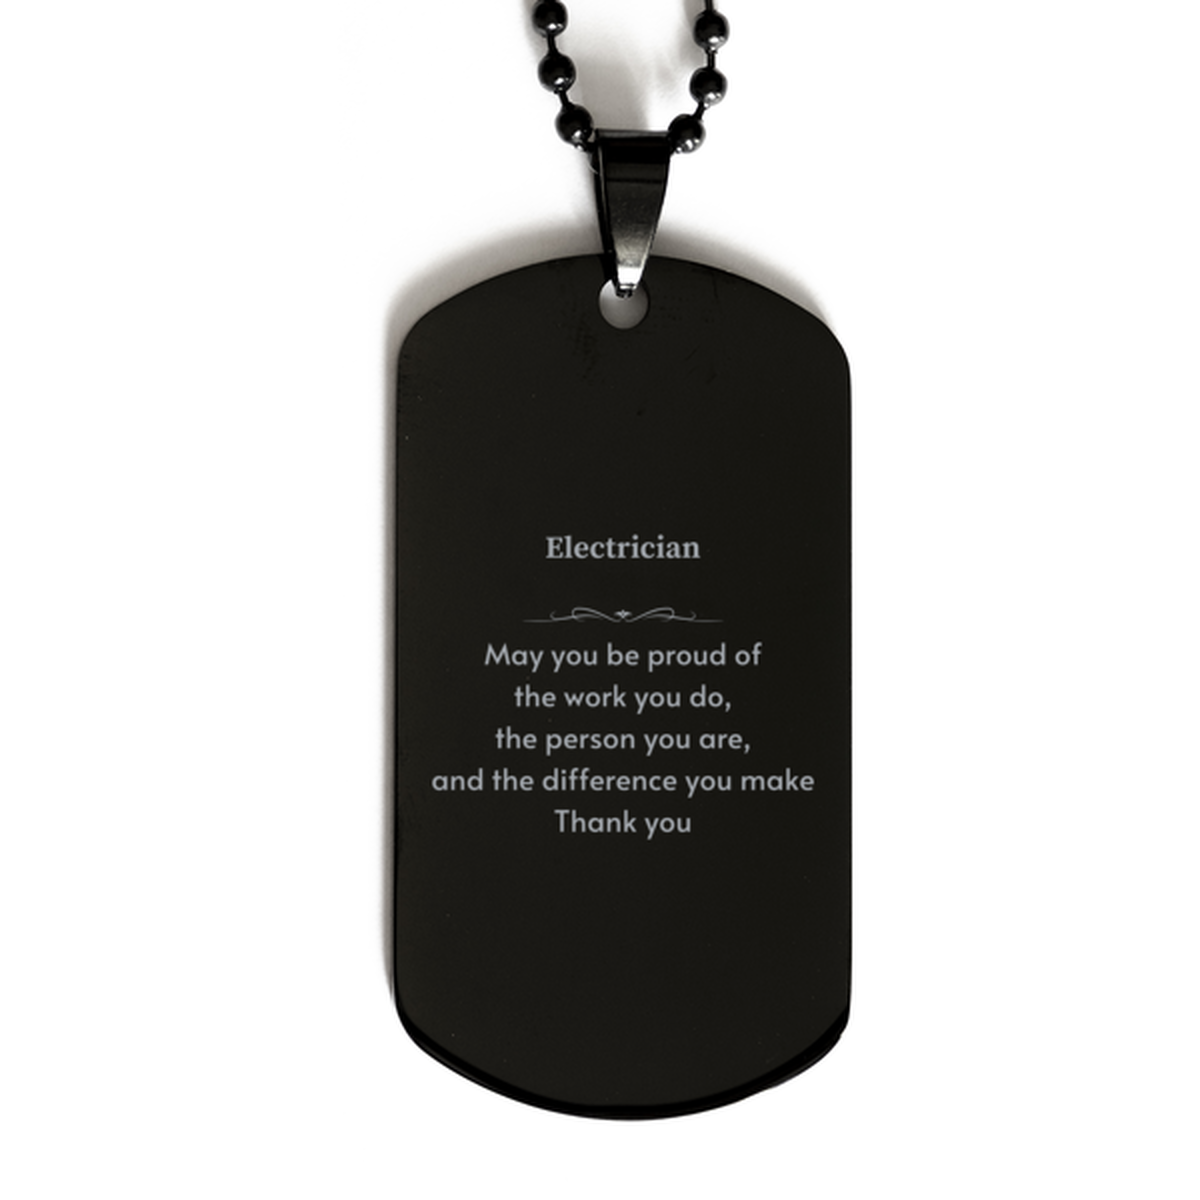 Heartwarming Black Dog Tag Retirement Coworkers Gifts for Electrician, Electrician May You be proud of the work you do, the person you are Gifts for Boss Men Women Friends